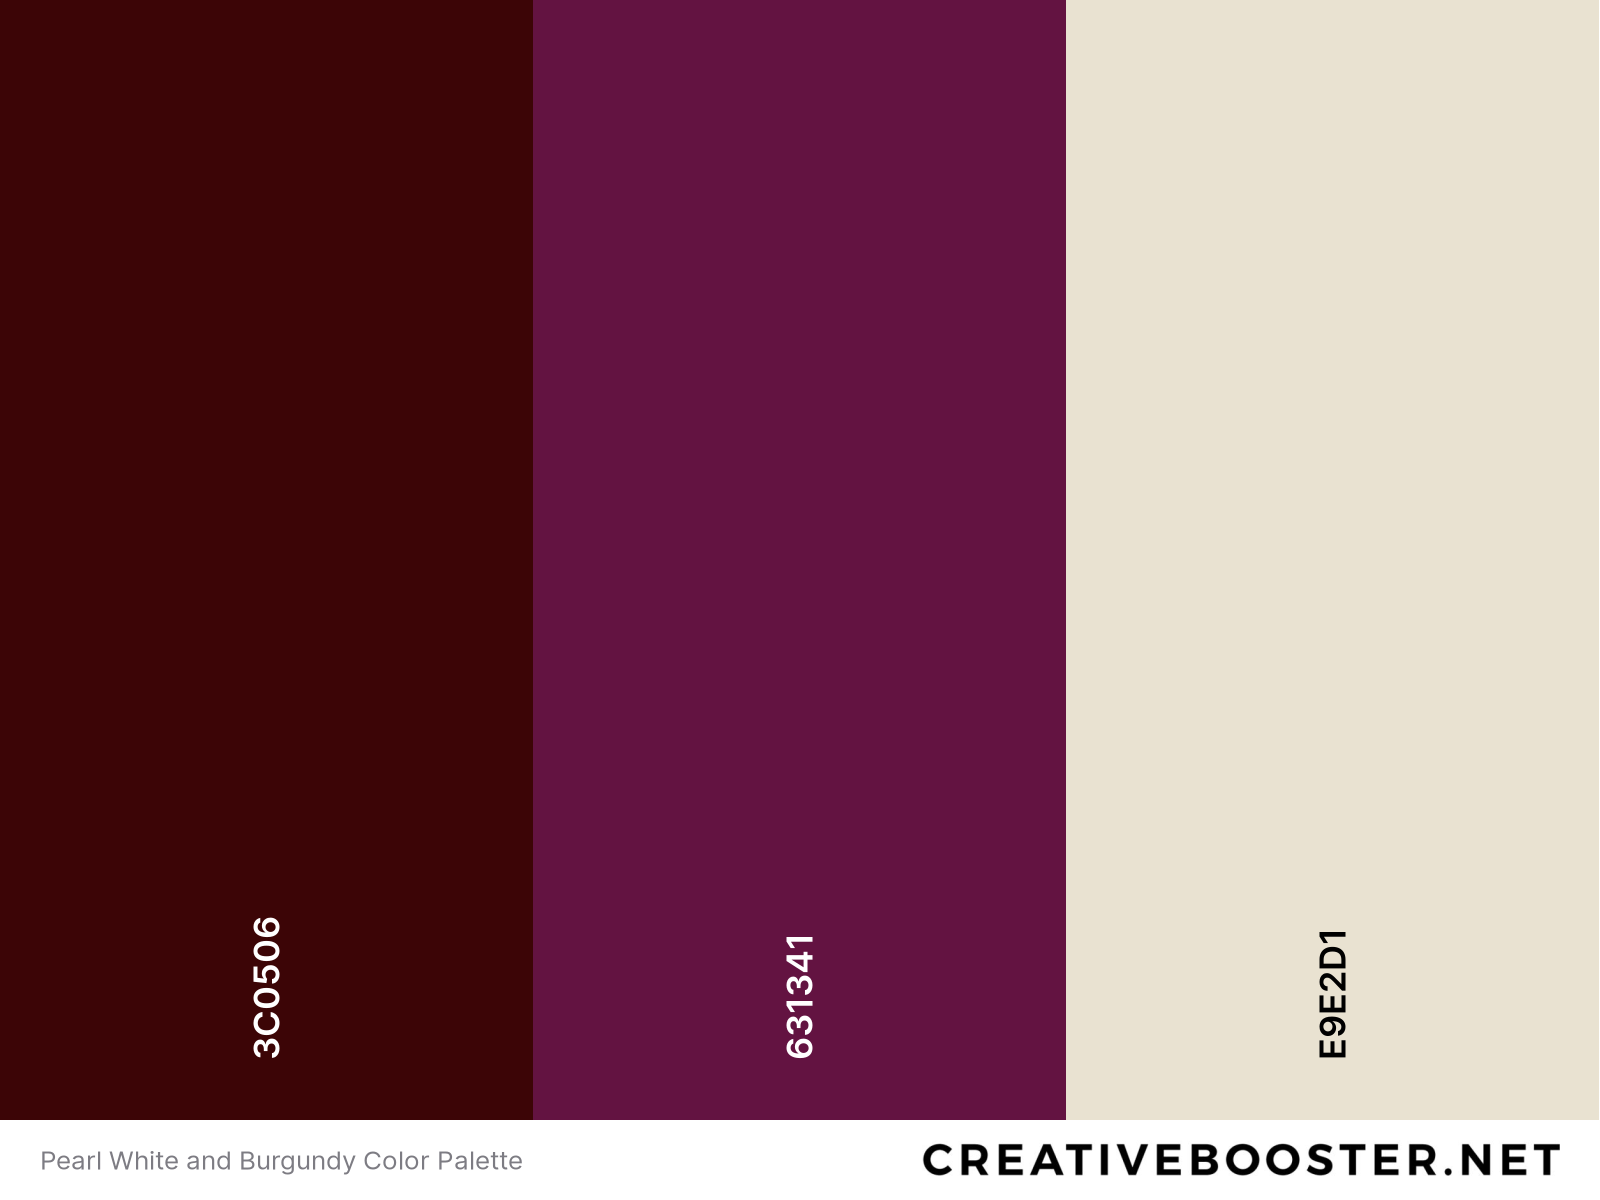 Pearl White and Burgundy Color Palette